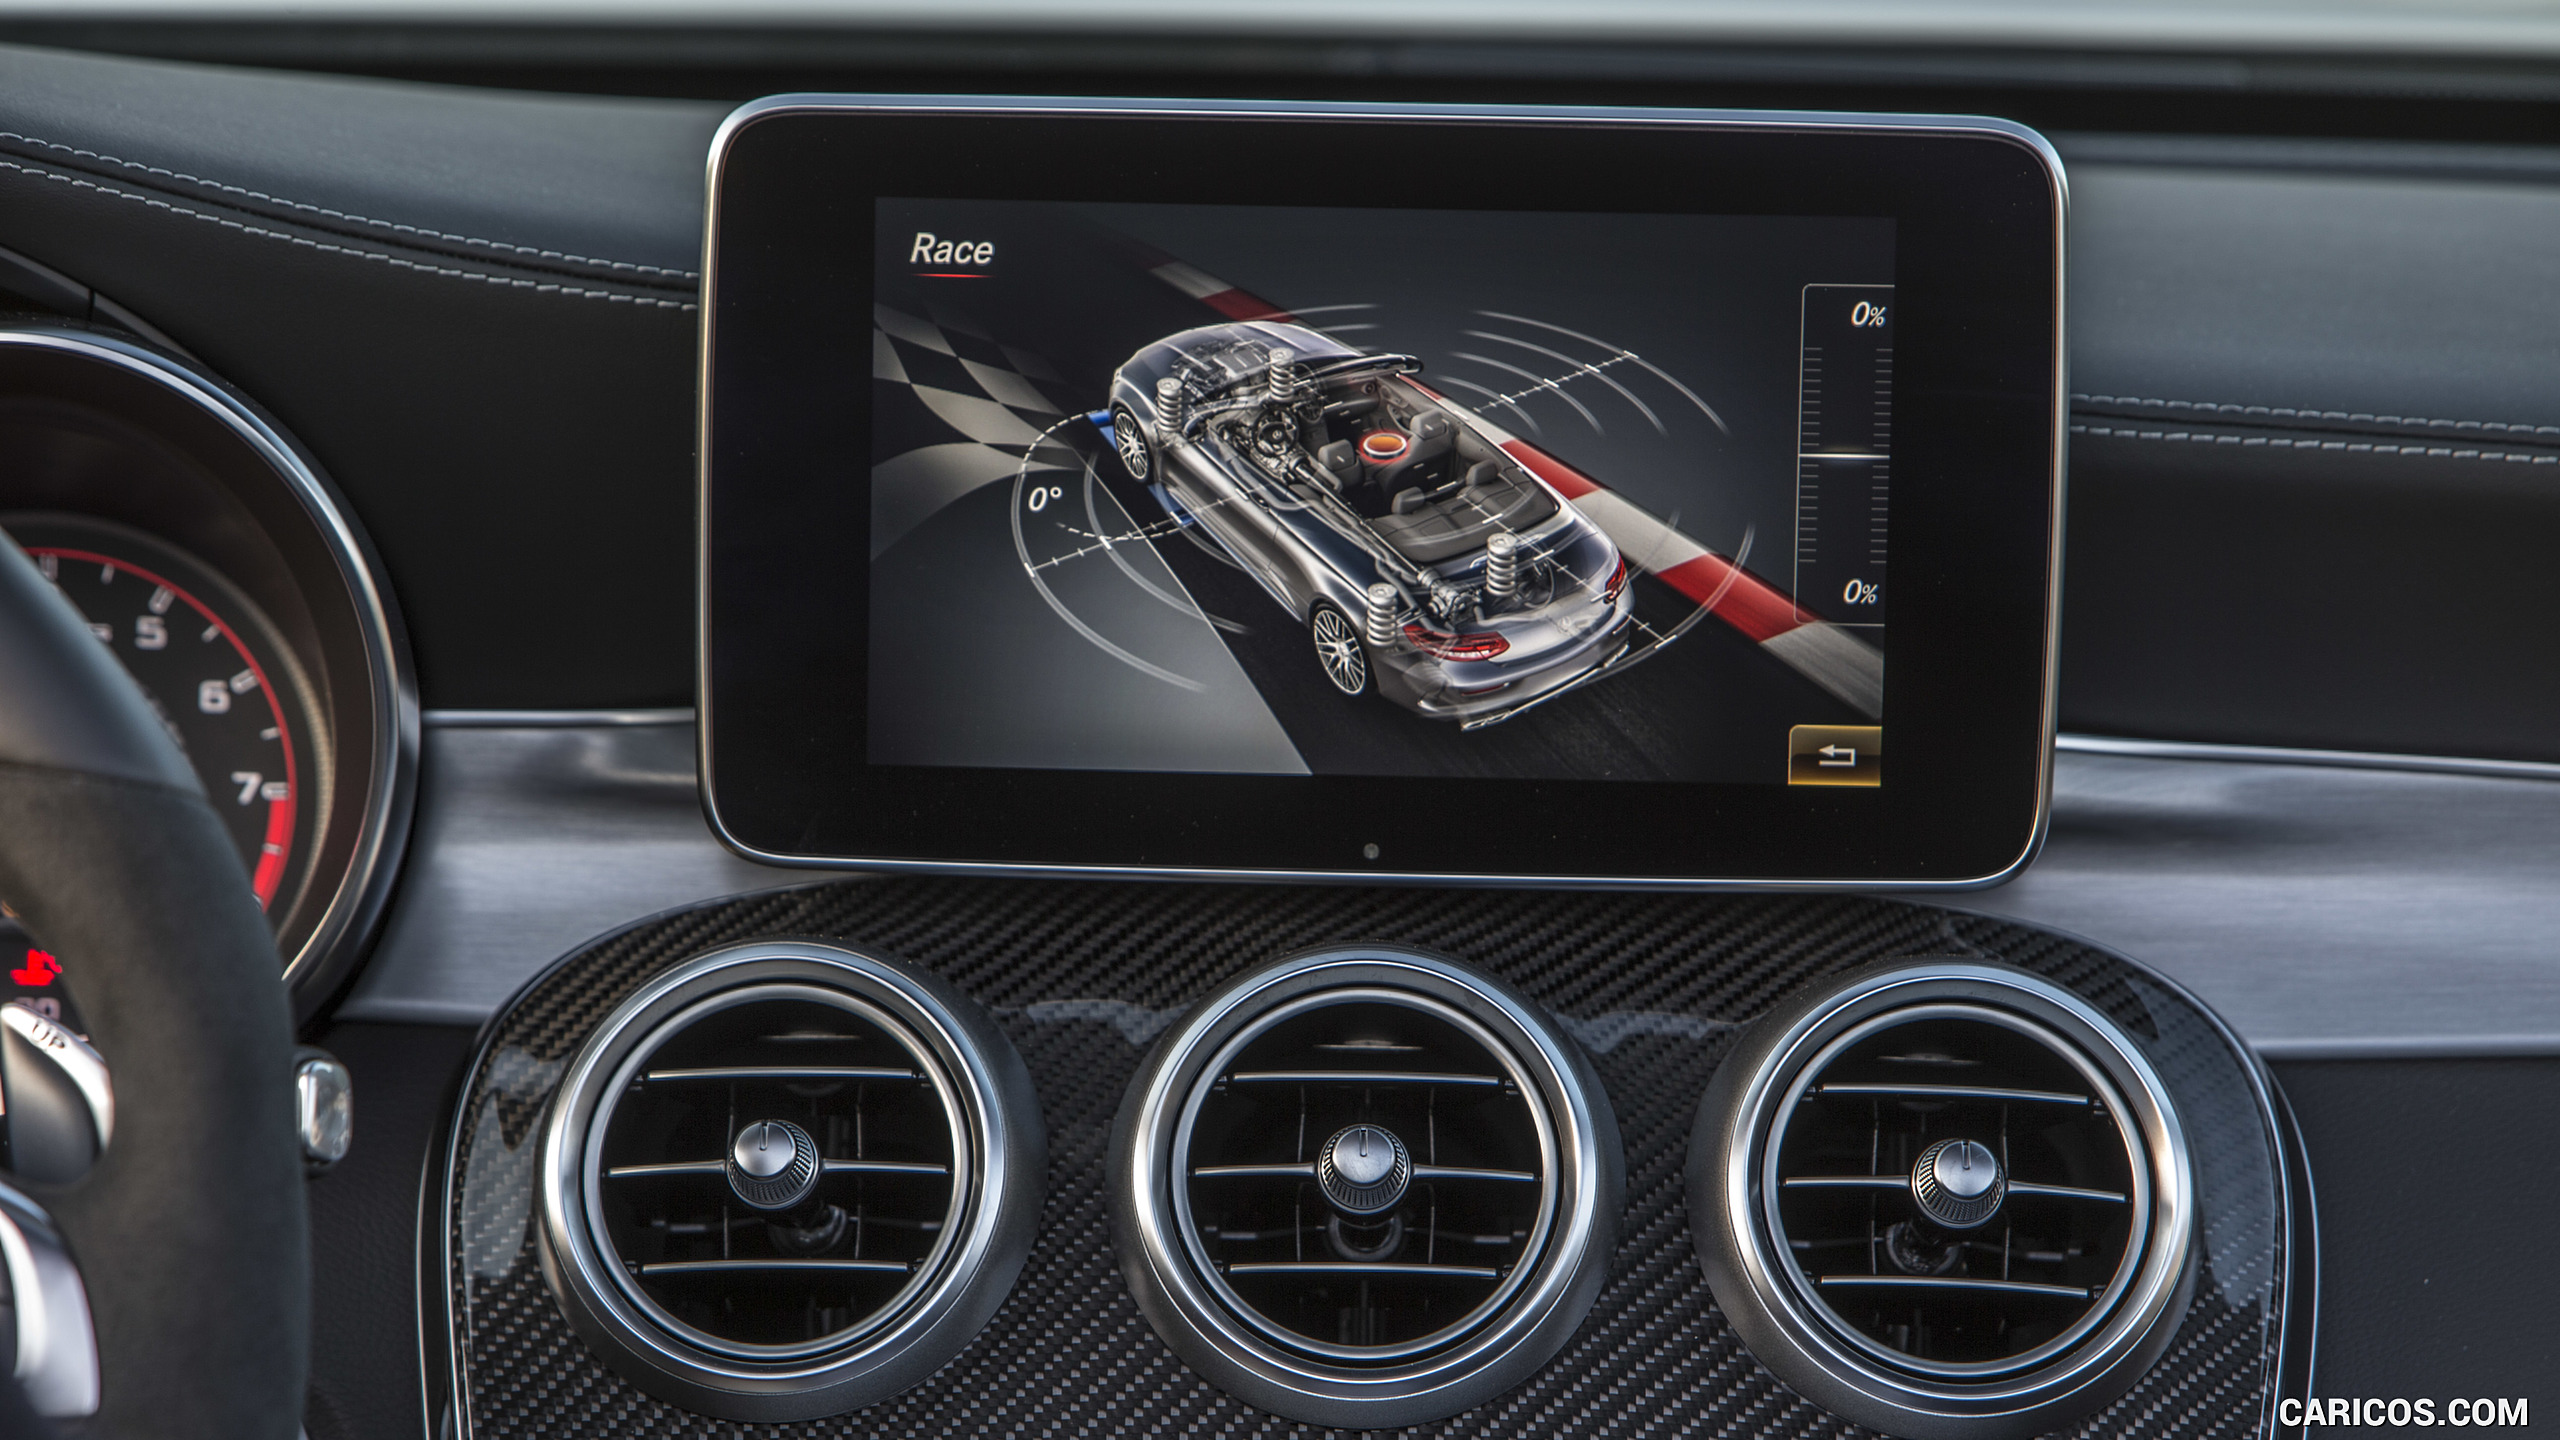 2017 Mercedes-AMG C63 S Cabriolet - Infotainment Screen - Central Console, #176 of 222